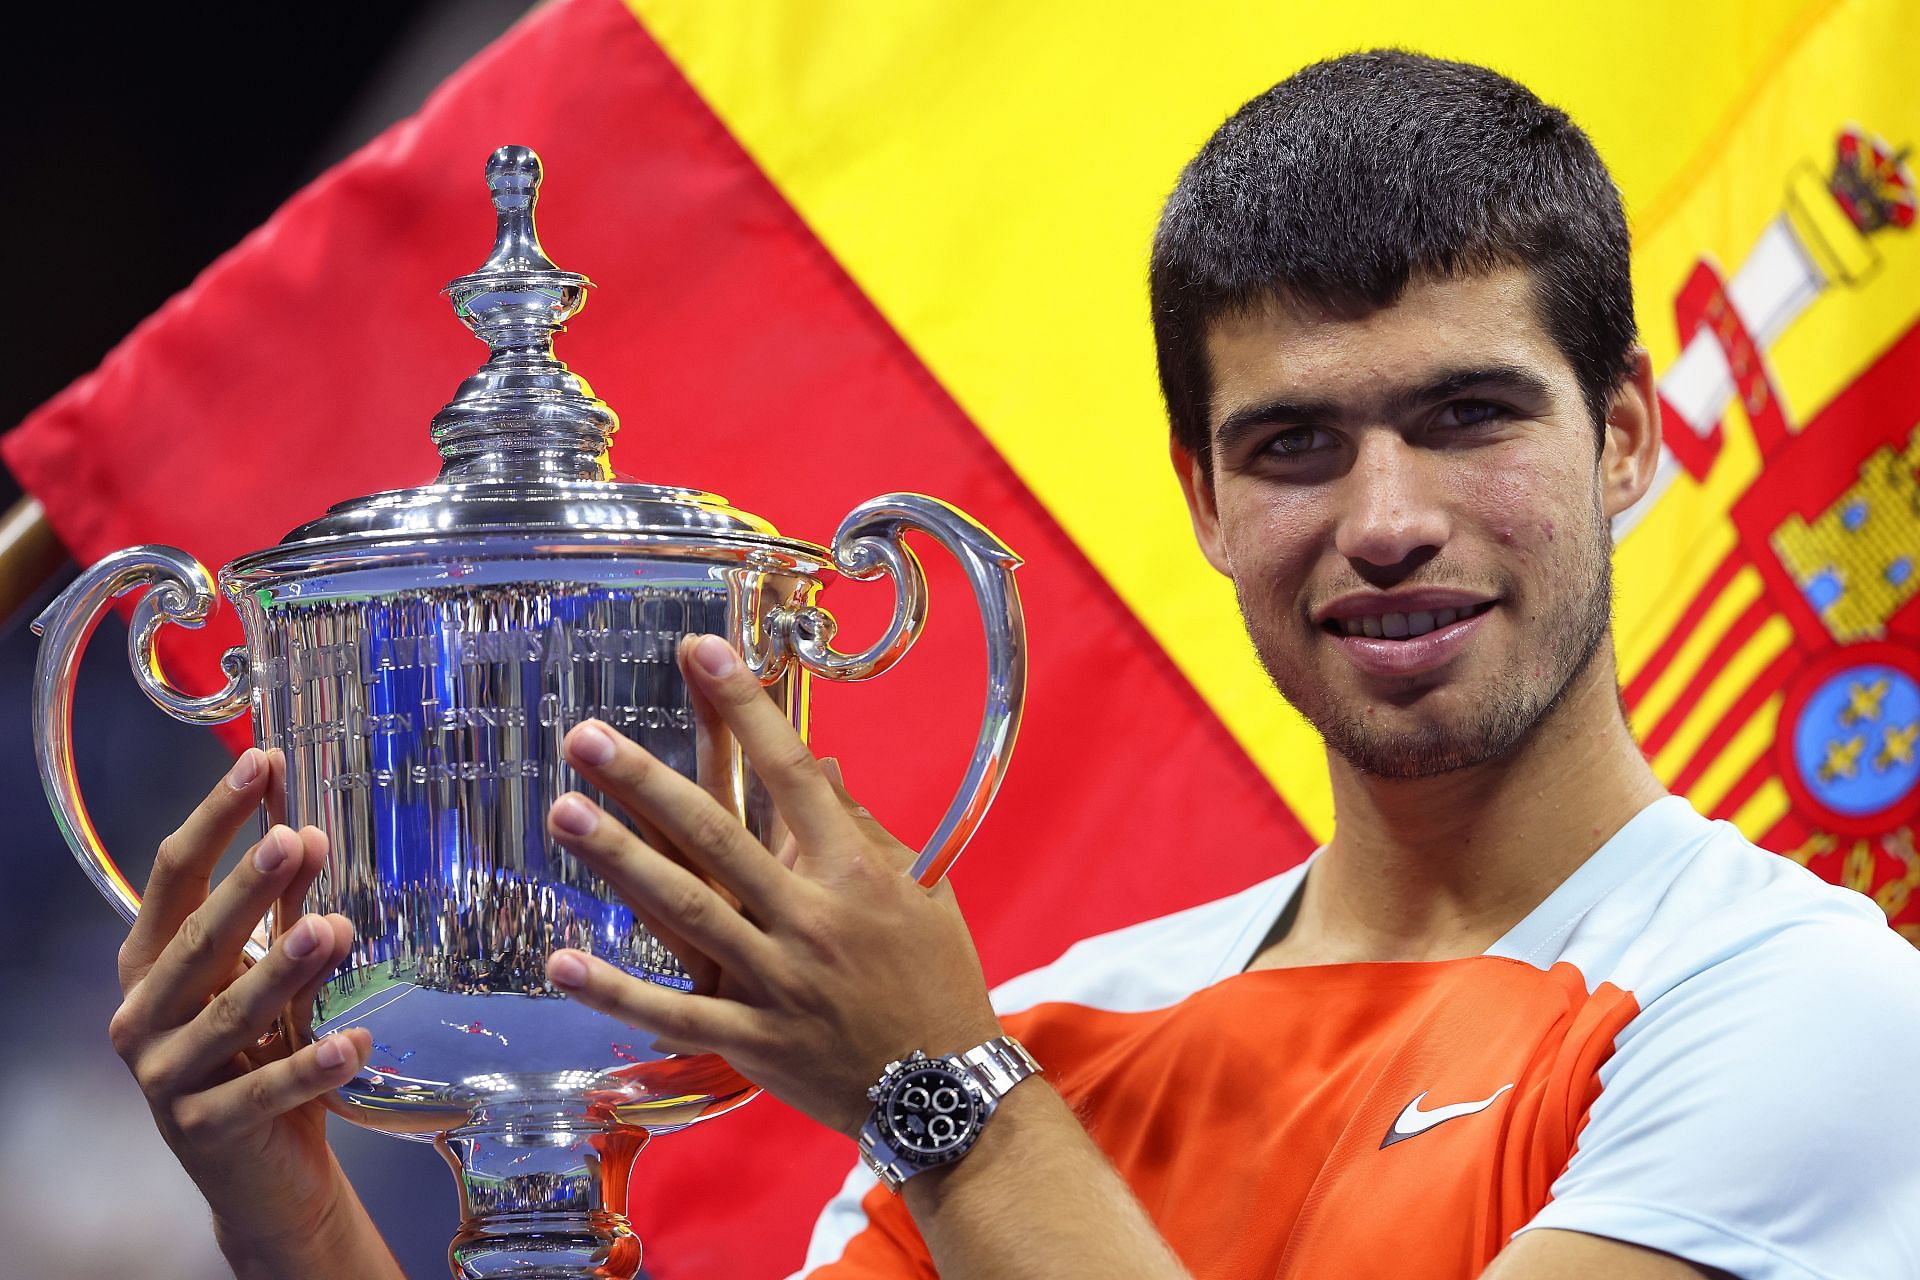 Alcaraz won his maiden Grand Slam title at the 2022 US Open